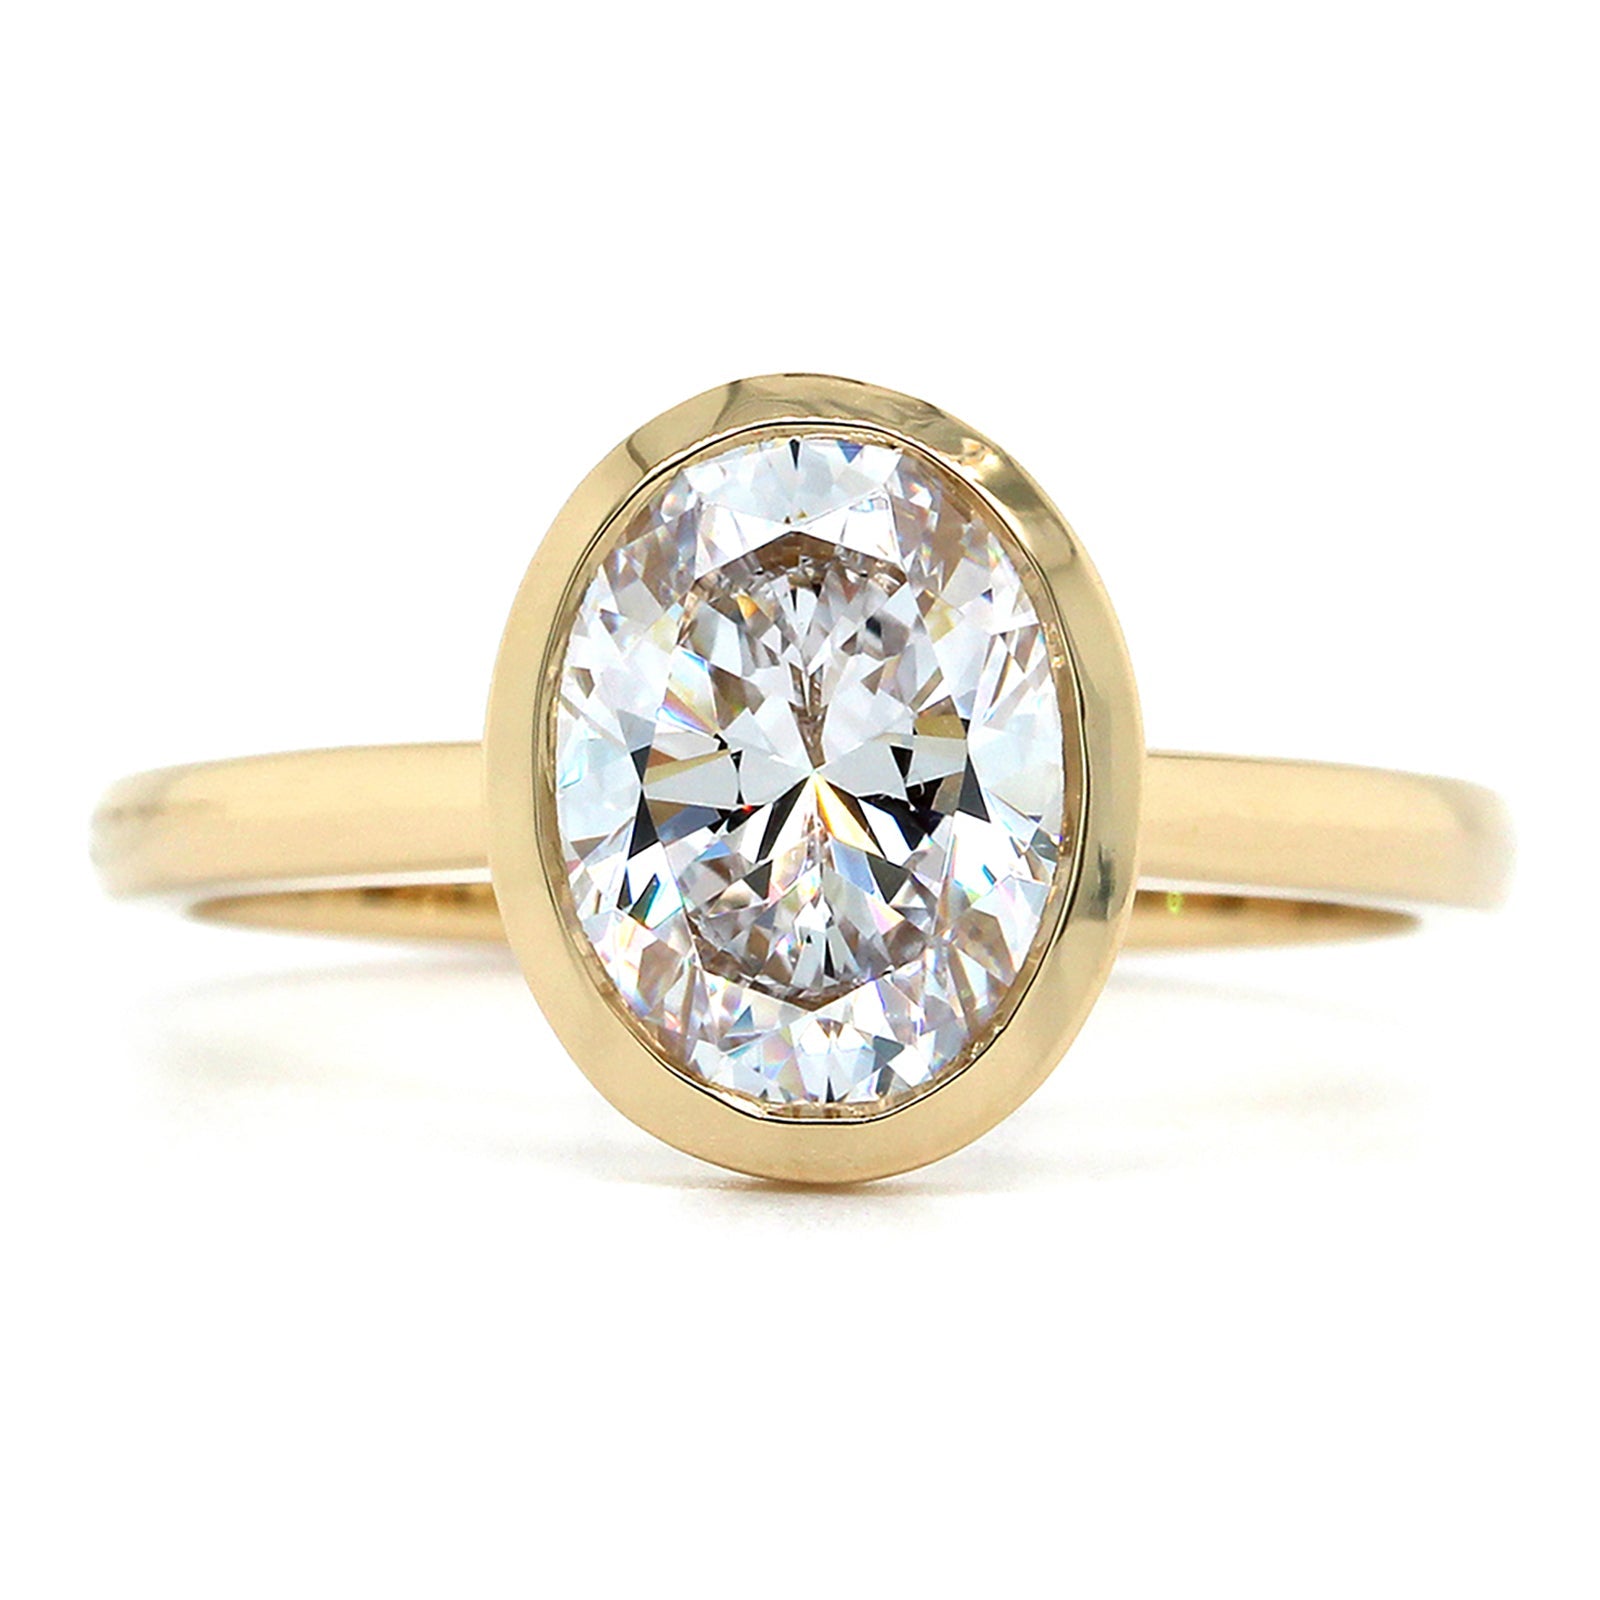 14K Yellow Gold Oval Bezel Set Cathedral Engagement Ring Setting, 14k yellow gold, Long's Jewelers